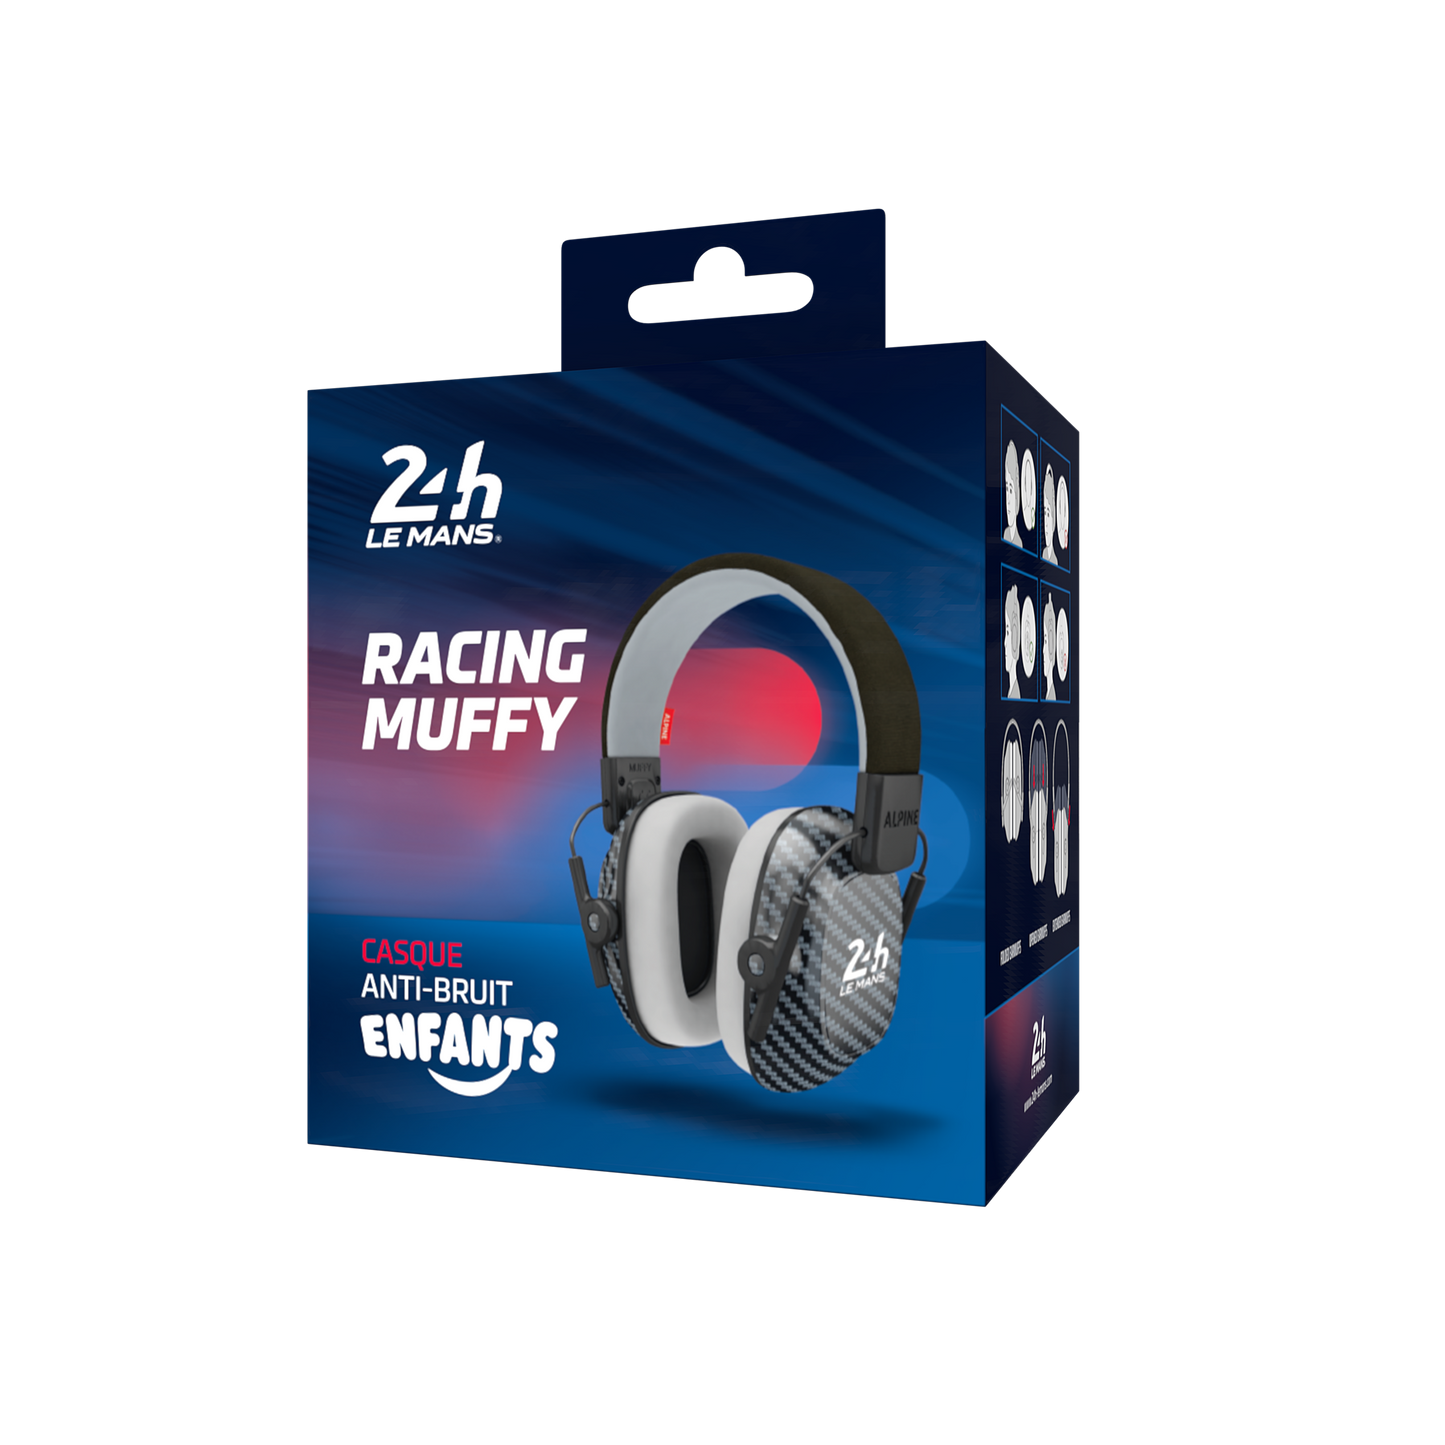 24h Le Mans® Racing Muffy